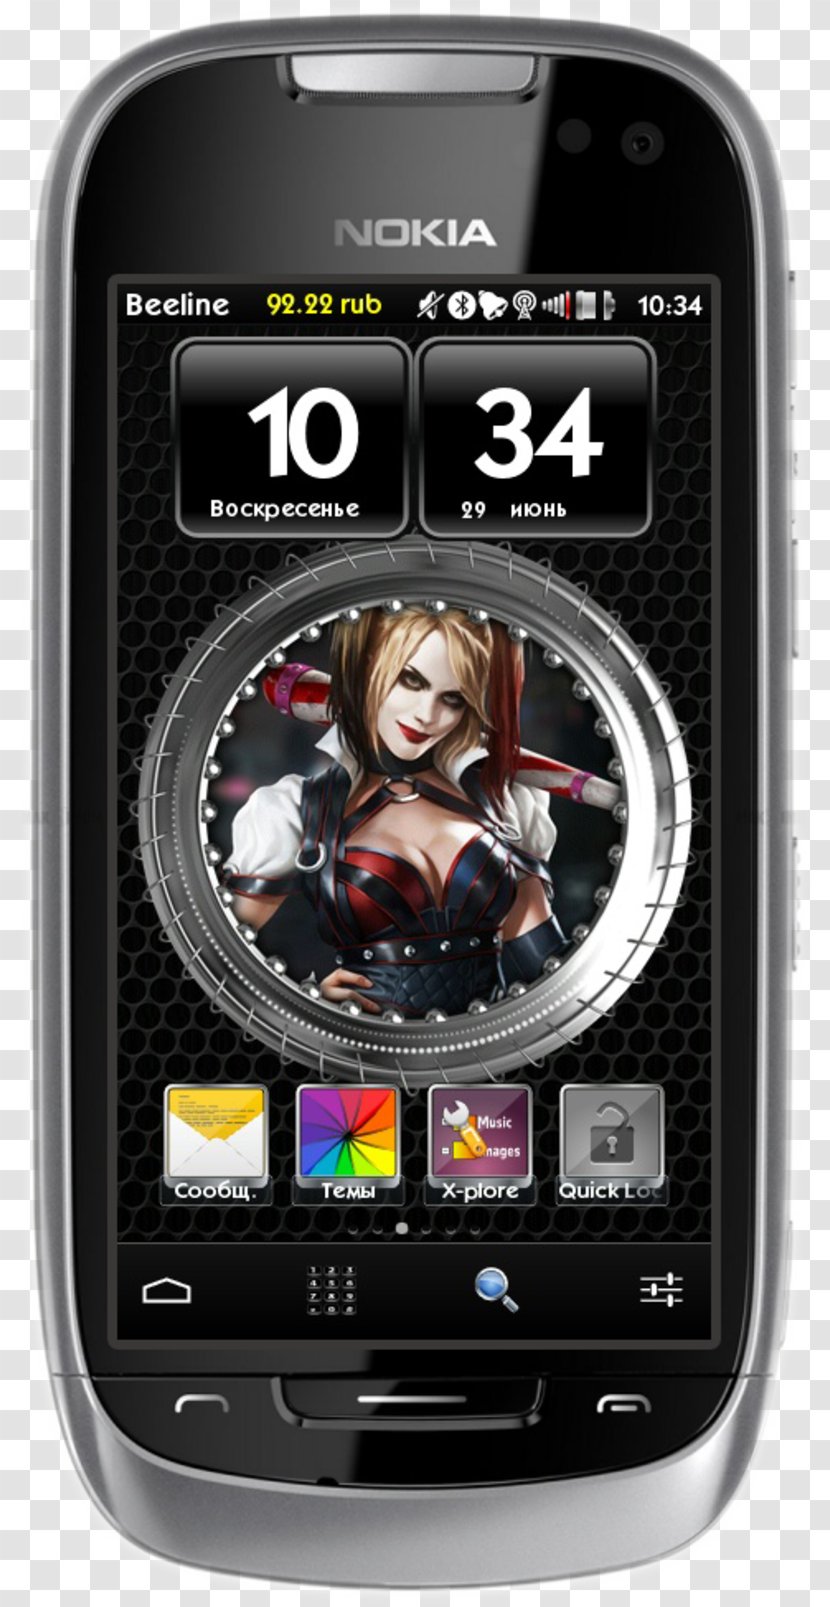 Feature Phone Smartphone Batman: Arkham Knight Mobile Phones Harley Quinn - Handheld Devices Transparent PNG